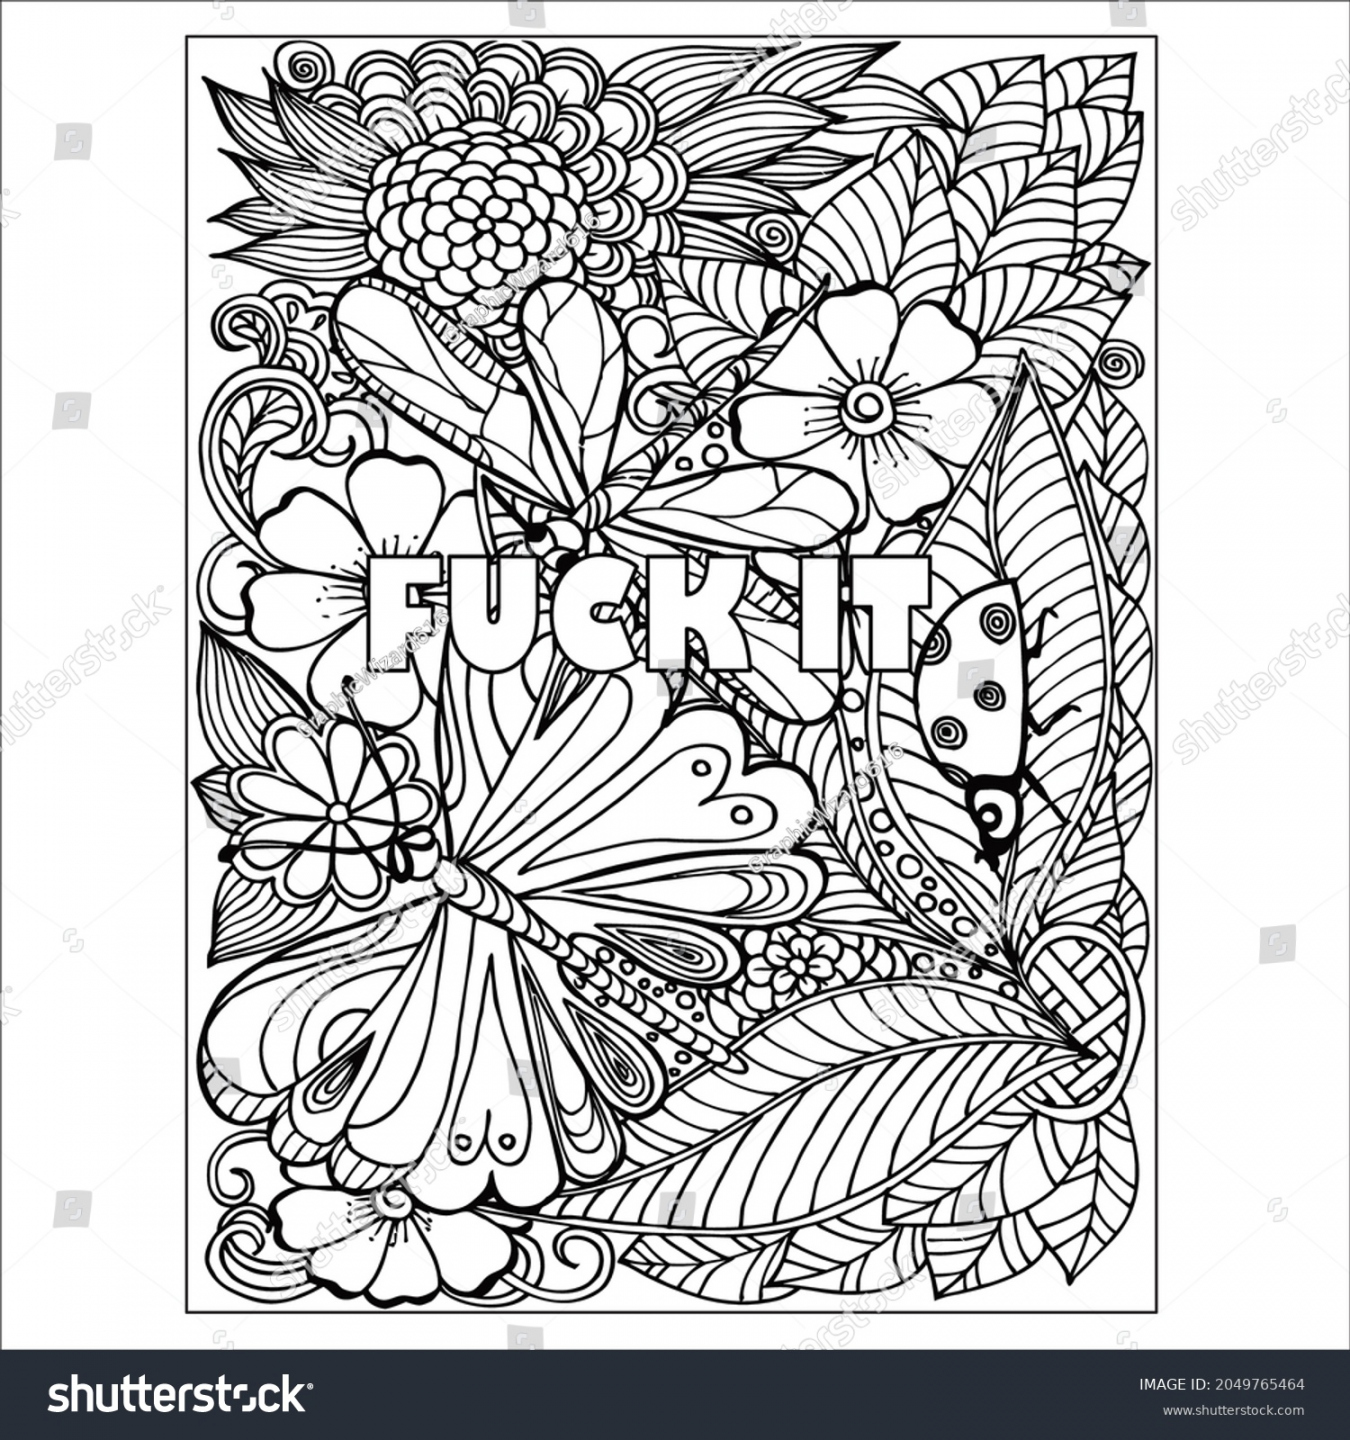 Free Printable Inappropriate Coloring Pages For Adults - Printable - , Swear Words Coloring Images, Stock Photos & Vectors